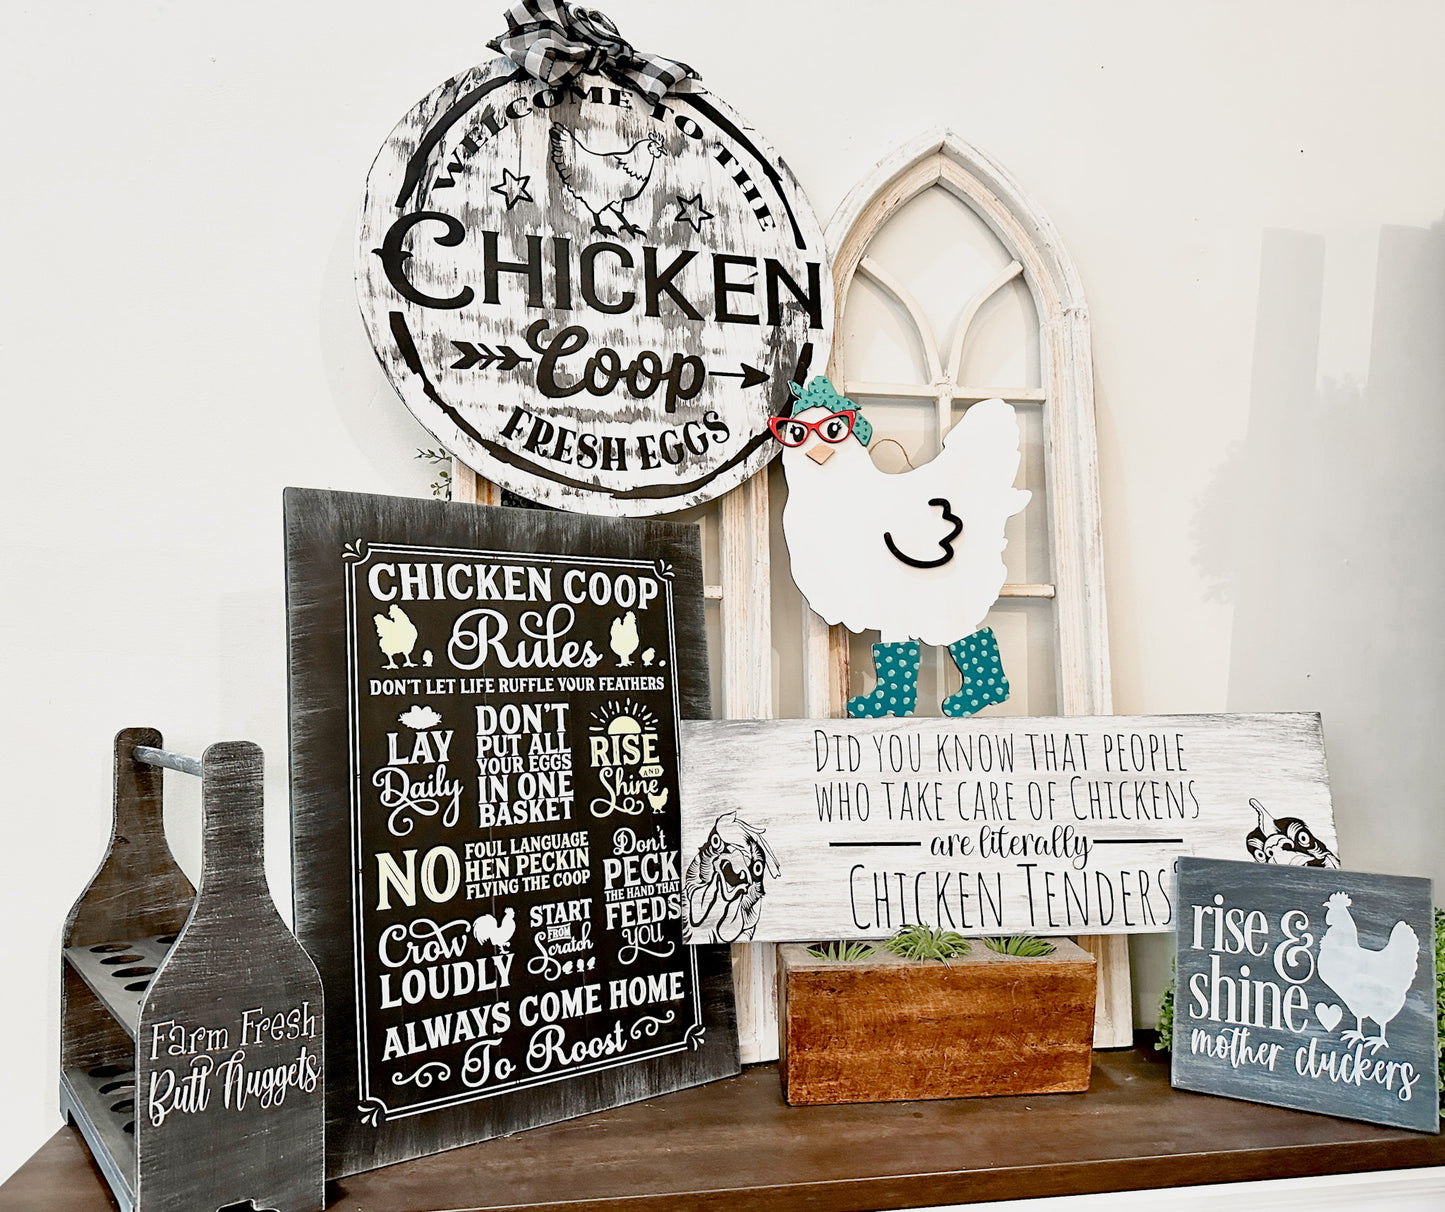 Did You Know People Who...Chicken Tenders Plank Design P02689